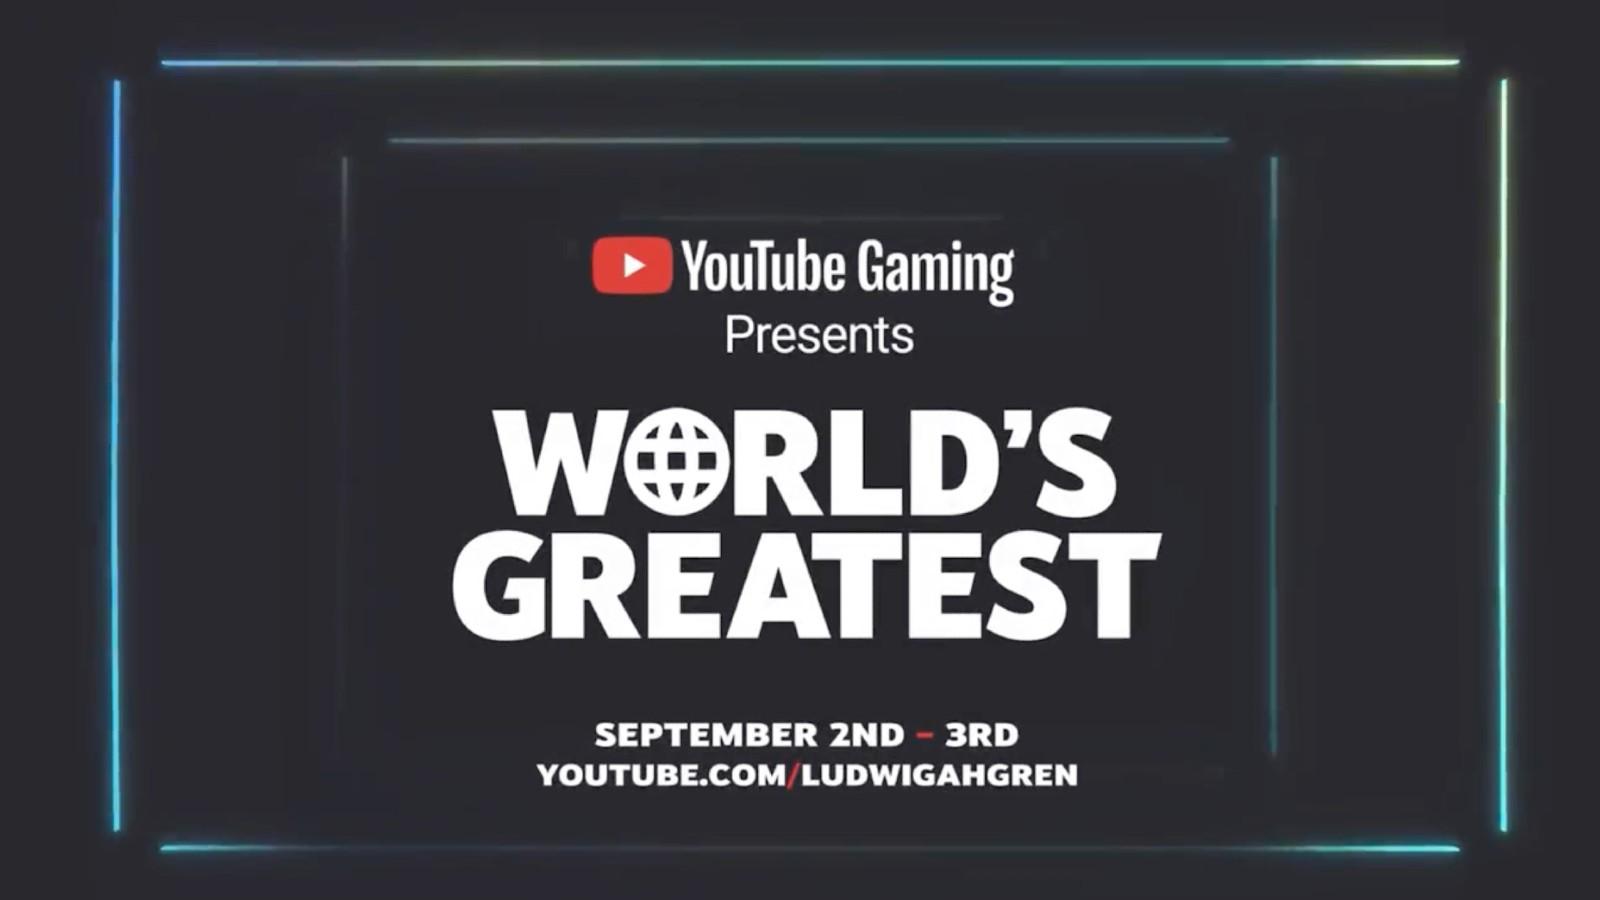 Ludwig's World's Greatest Esports event